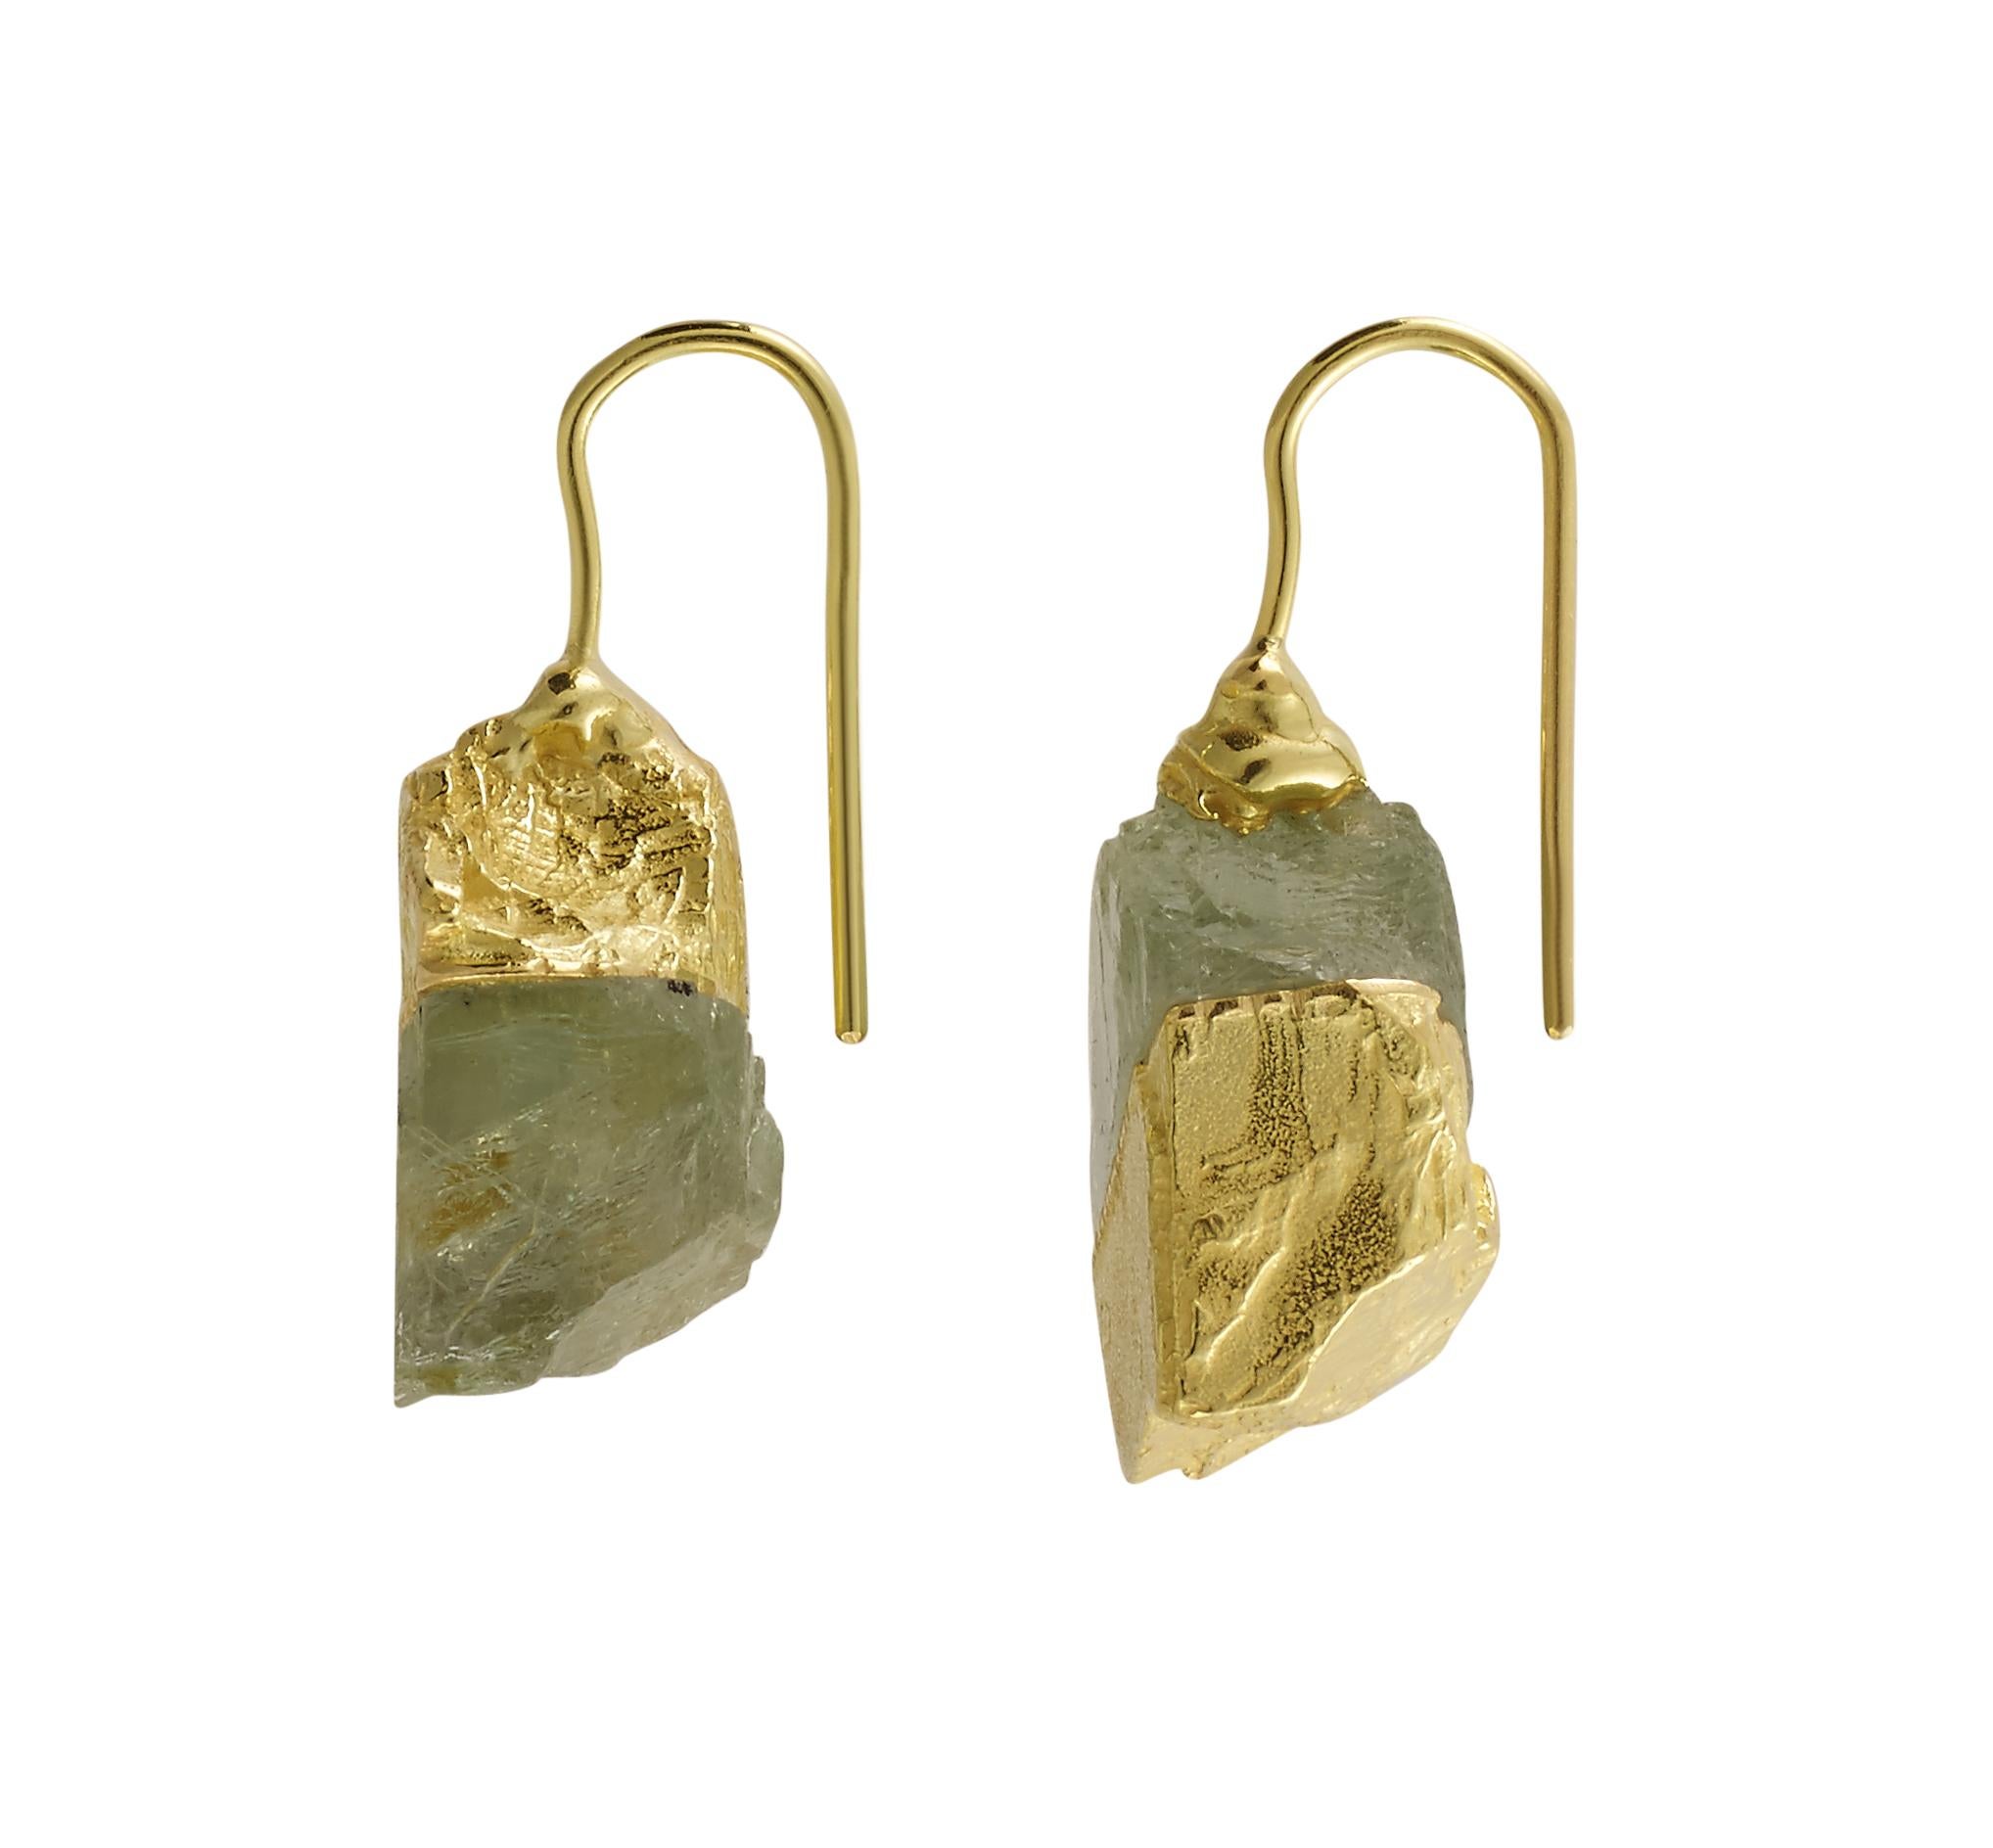 The Rock Hound are self confessed gem geeks and their RockStars Raw Collection is an homage to the structural form of natural crystals.

The RockStars Raw Albite Drop Earrings showcase raw Tanzanian Albite crystals which we sliced in half, cast in